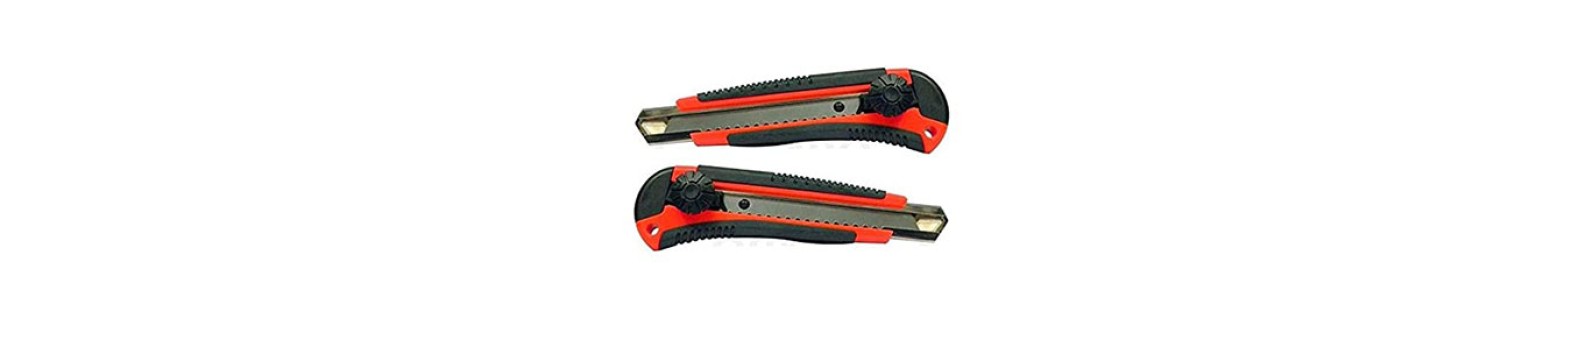 Snap Cutters